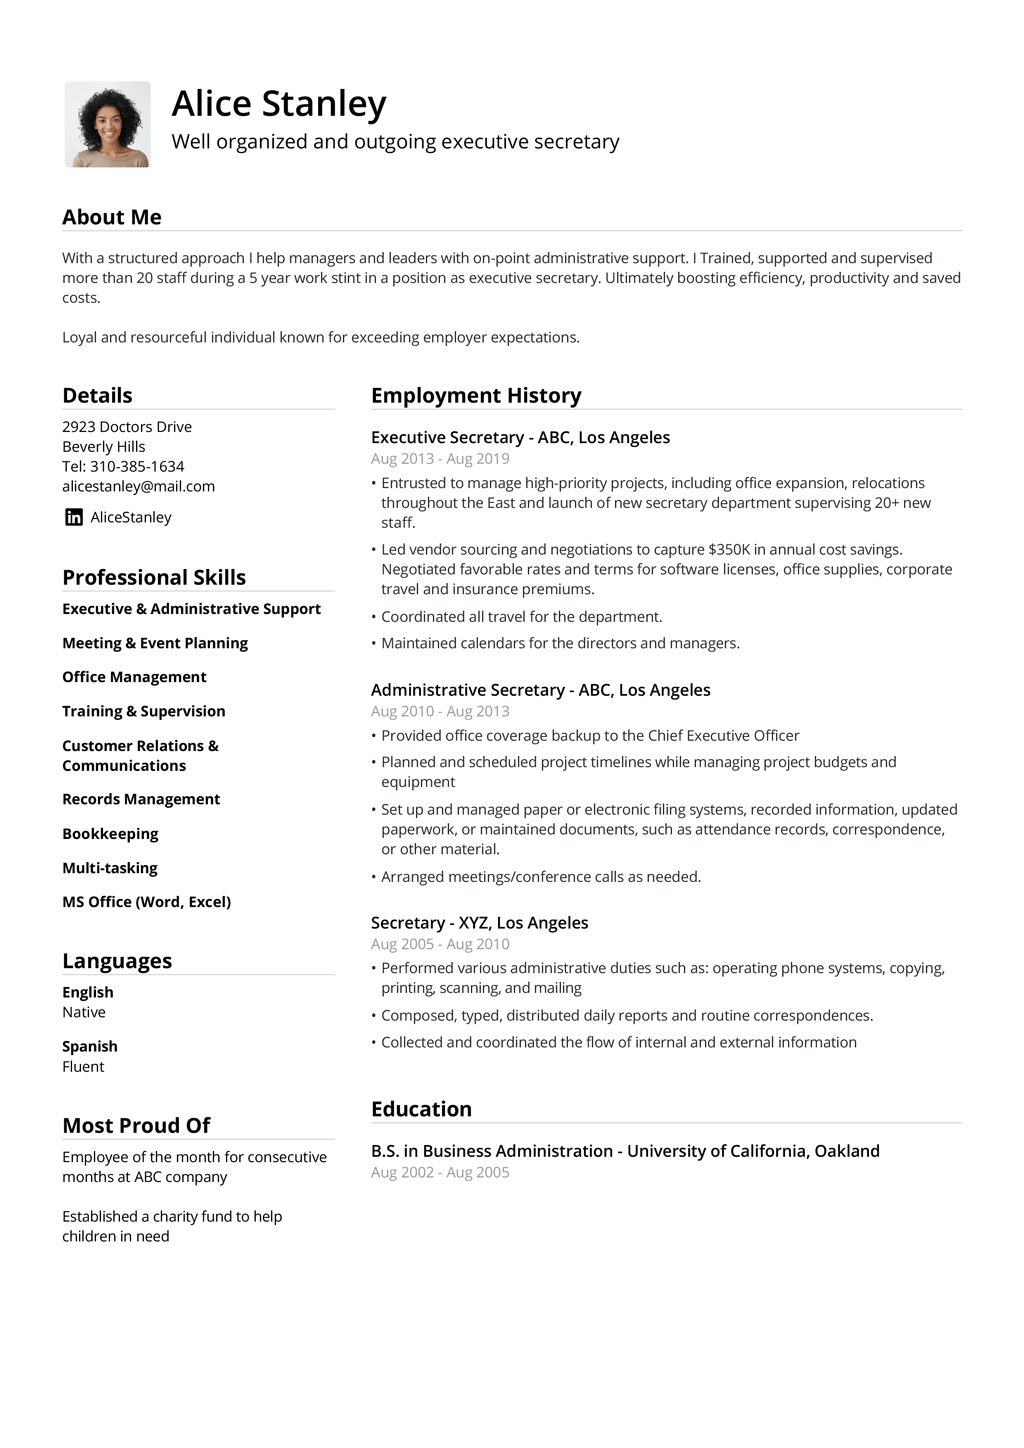 Welcome to a New Look Of Resume